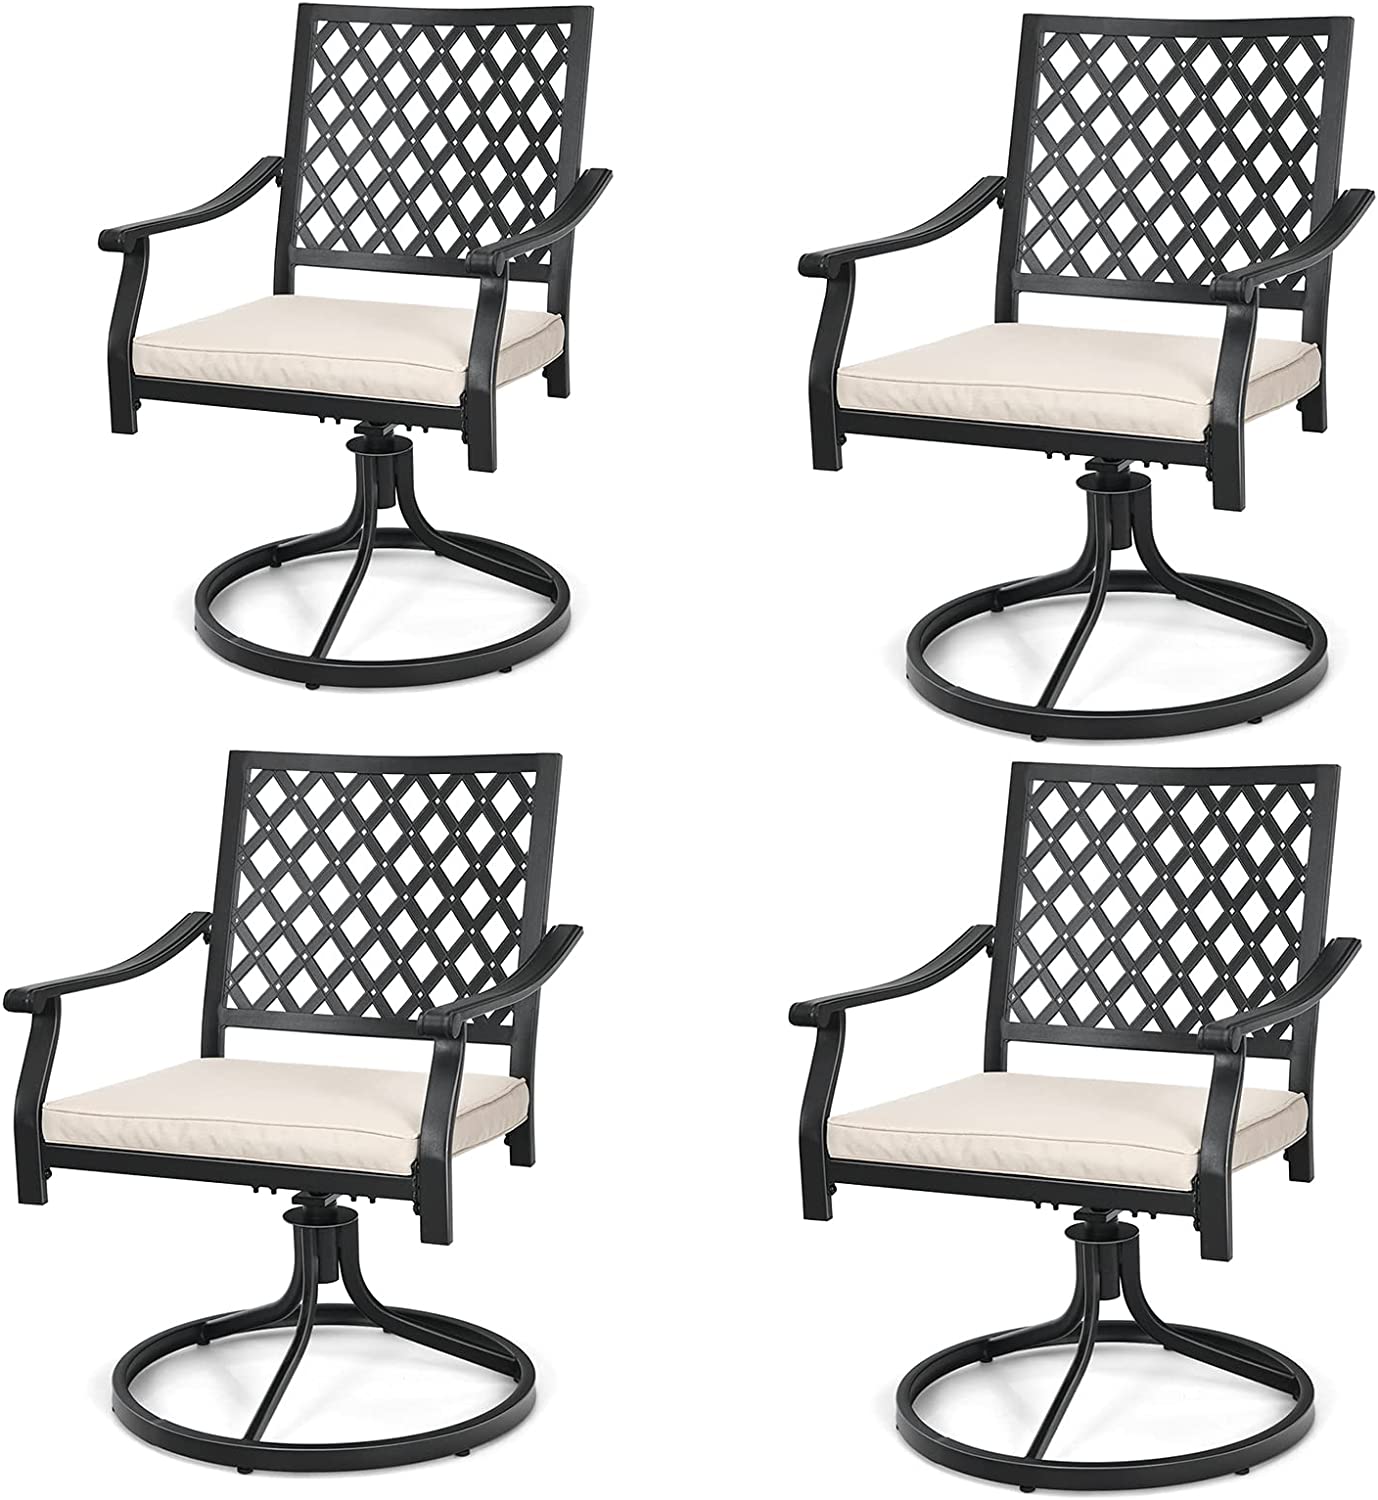 Giantex 2 or 4 Pack Swivel Outdoor Chairs, Patio Dining Rocking Chairs